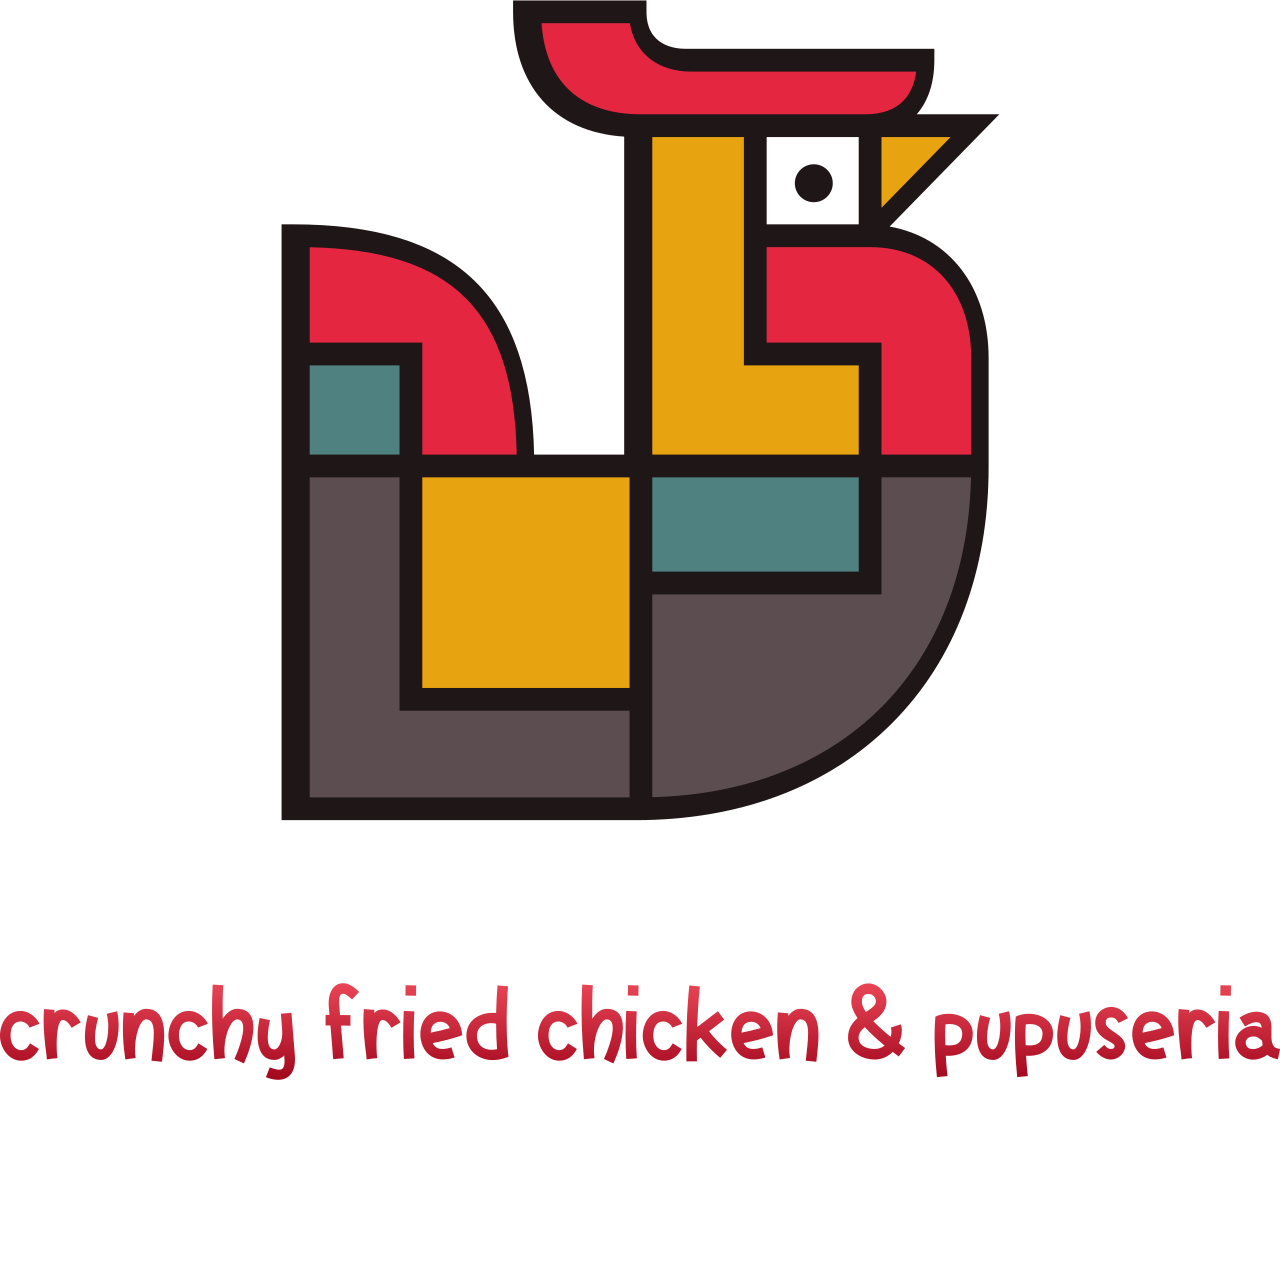 crunchy fried chicken & pupuseria's web page